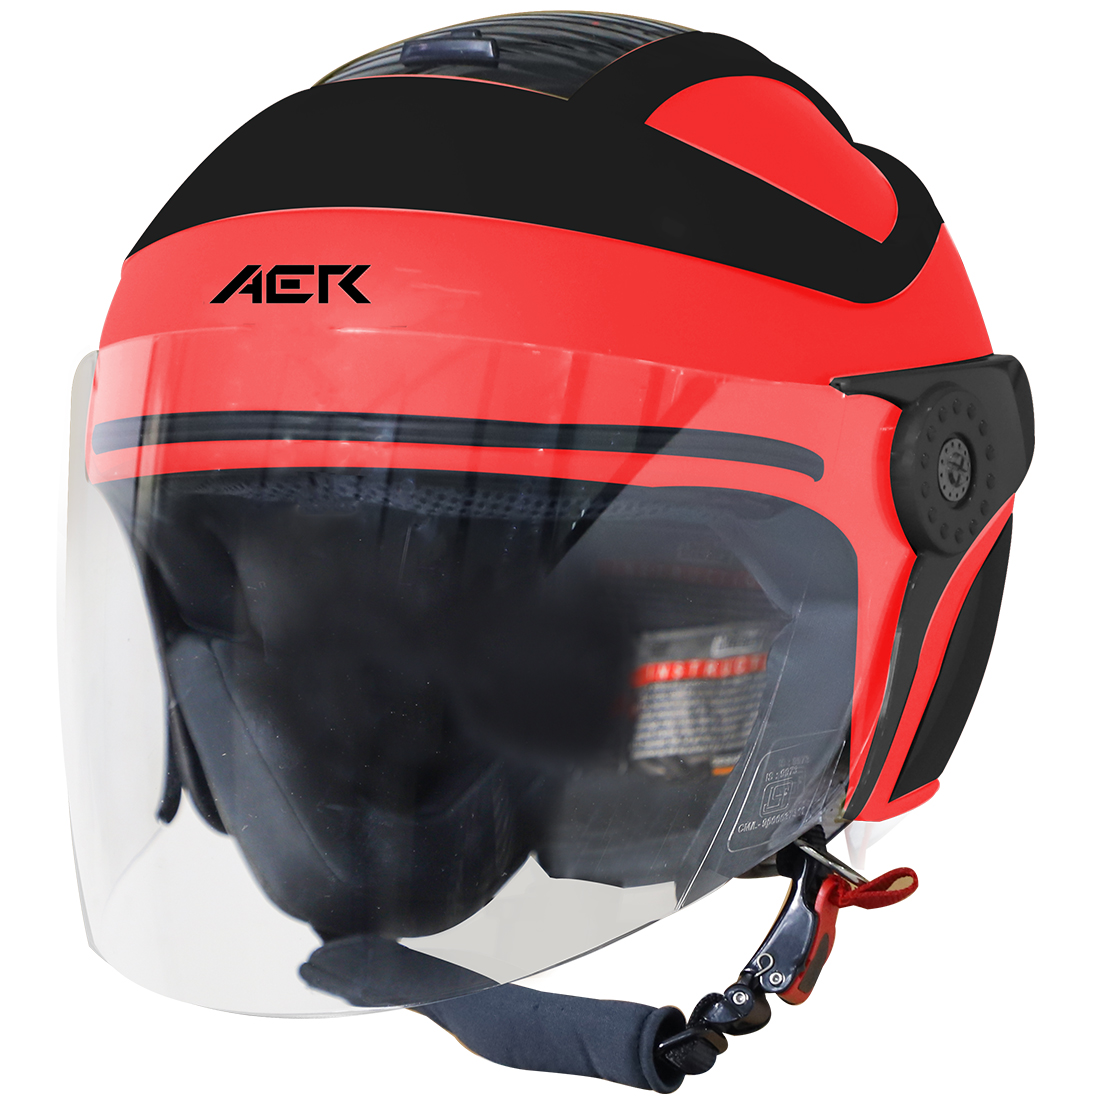 Steelbird SB-29 AER ISI Certified Open Face Helmet for Men and Women (Glossy Fluo Watermelon with Clear Visor)